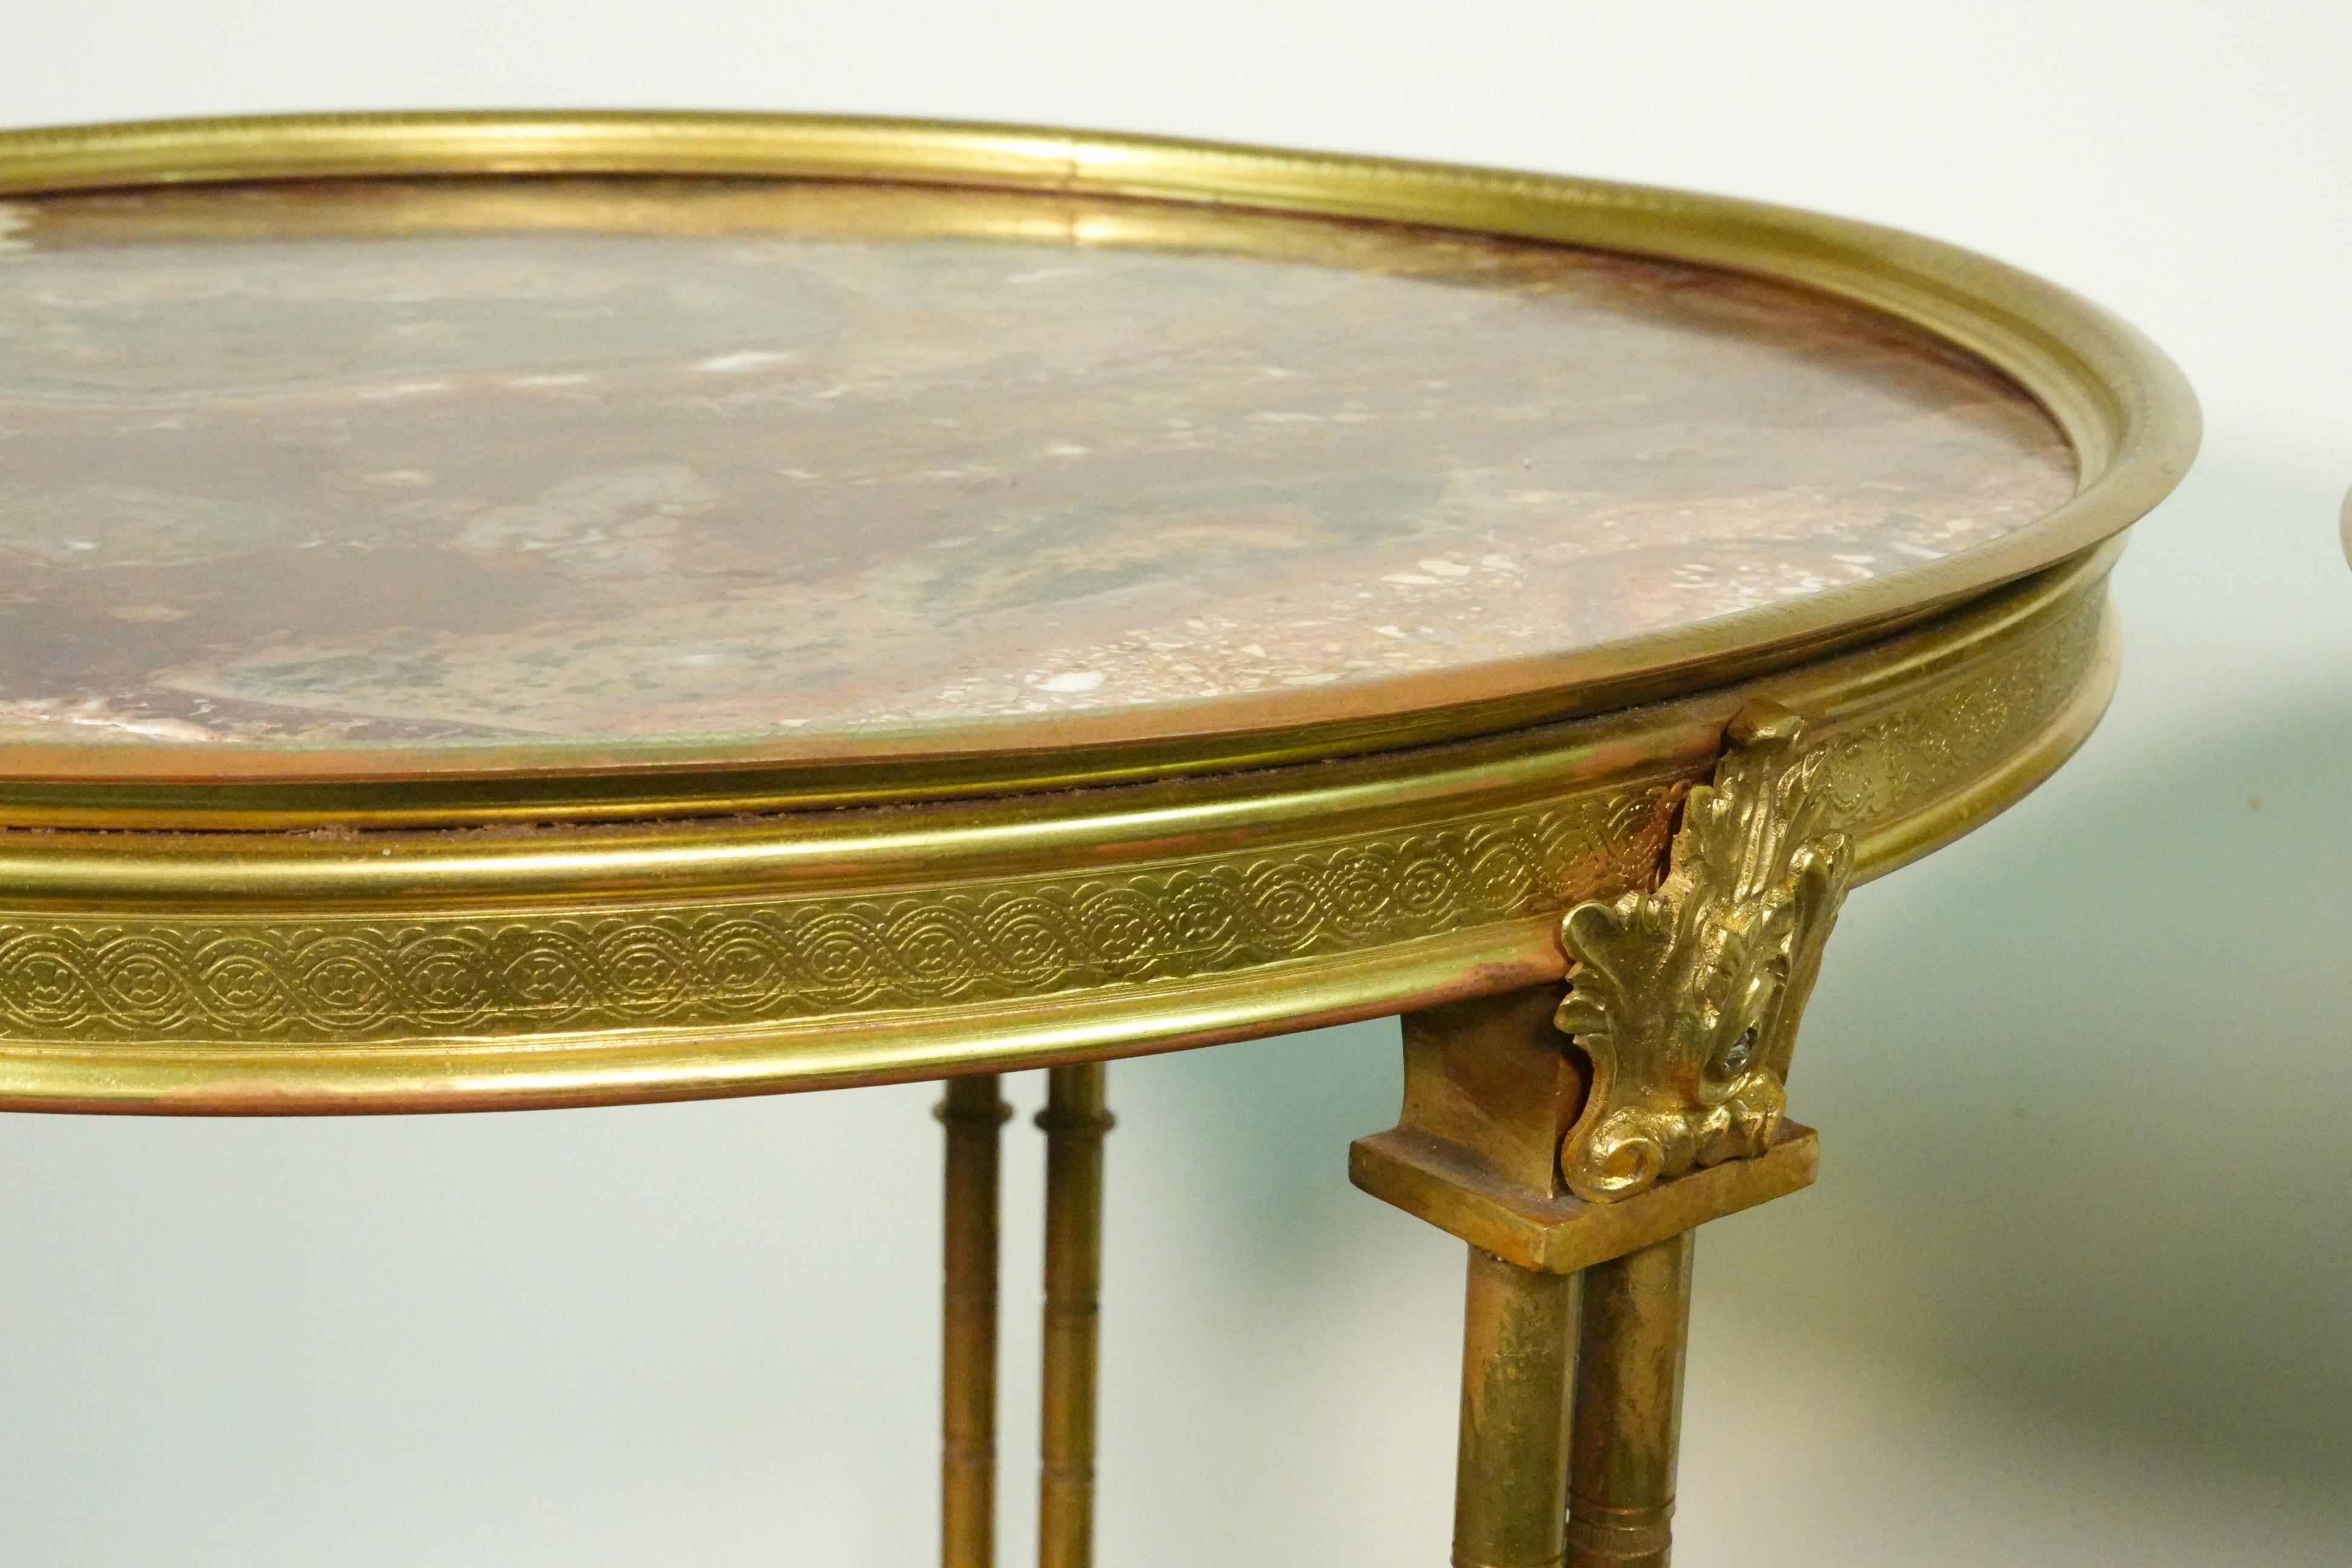 Pair of Louis XVI Style Gilt-Bronze Gueridons with Breche d'Alep Marble Tops For Sale 12